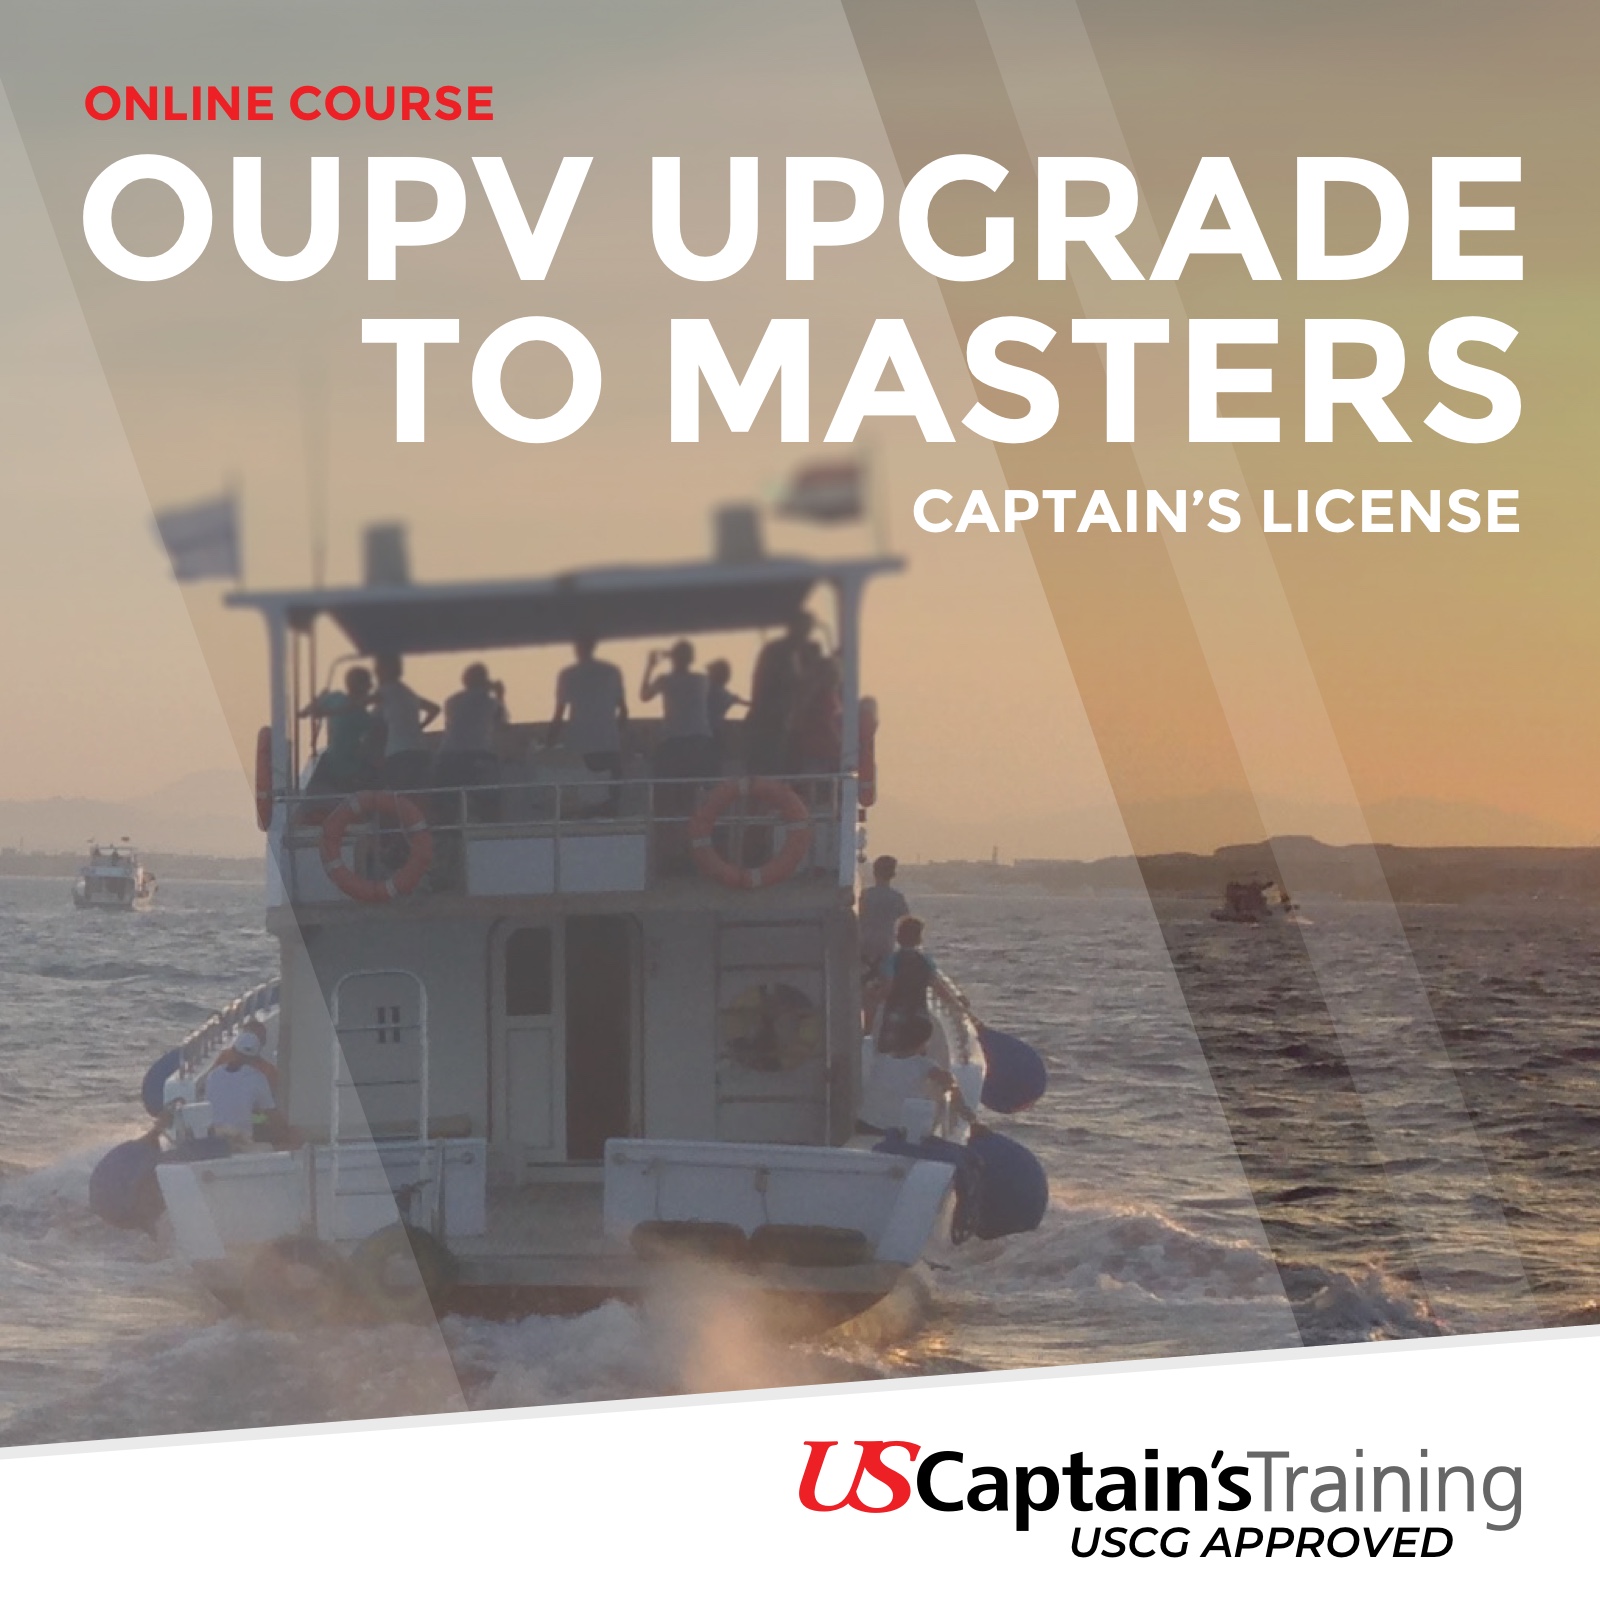 Captain's License Online Course & Exam from US Captain's Training - OUPV Upgrade to Masters